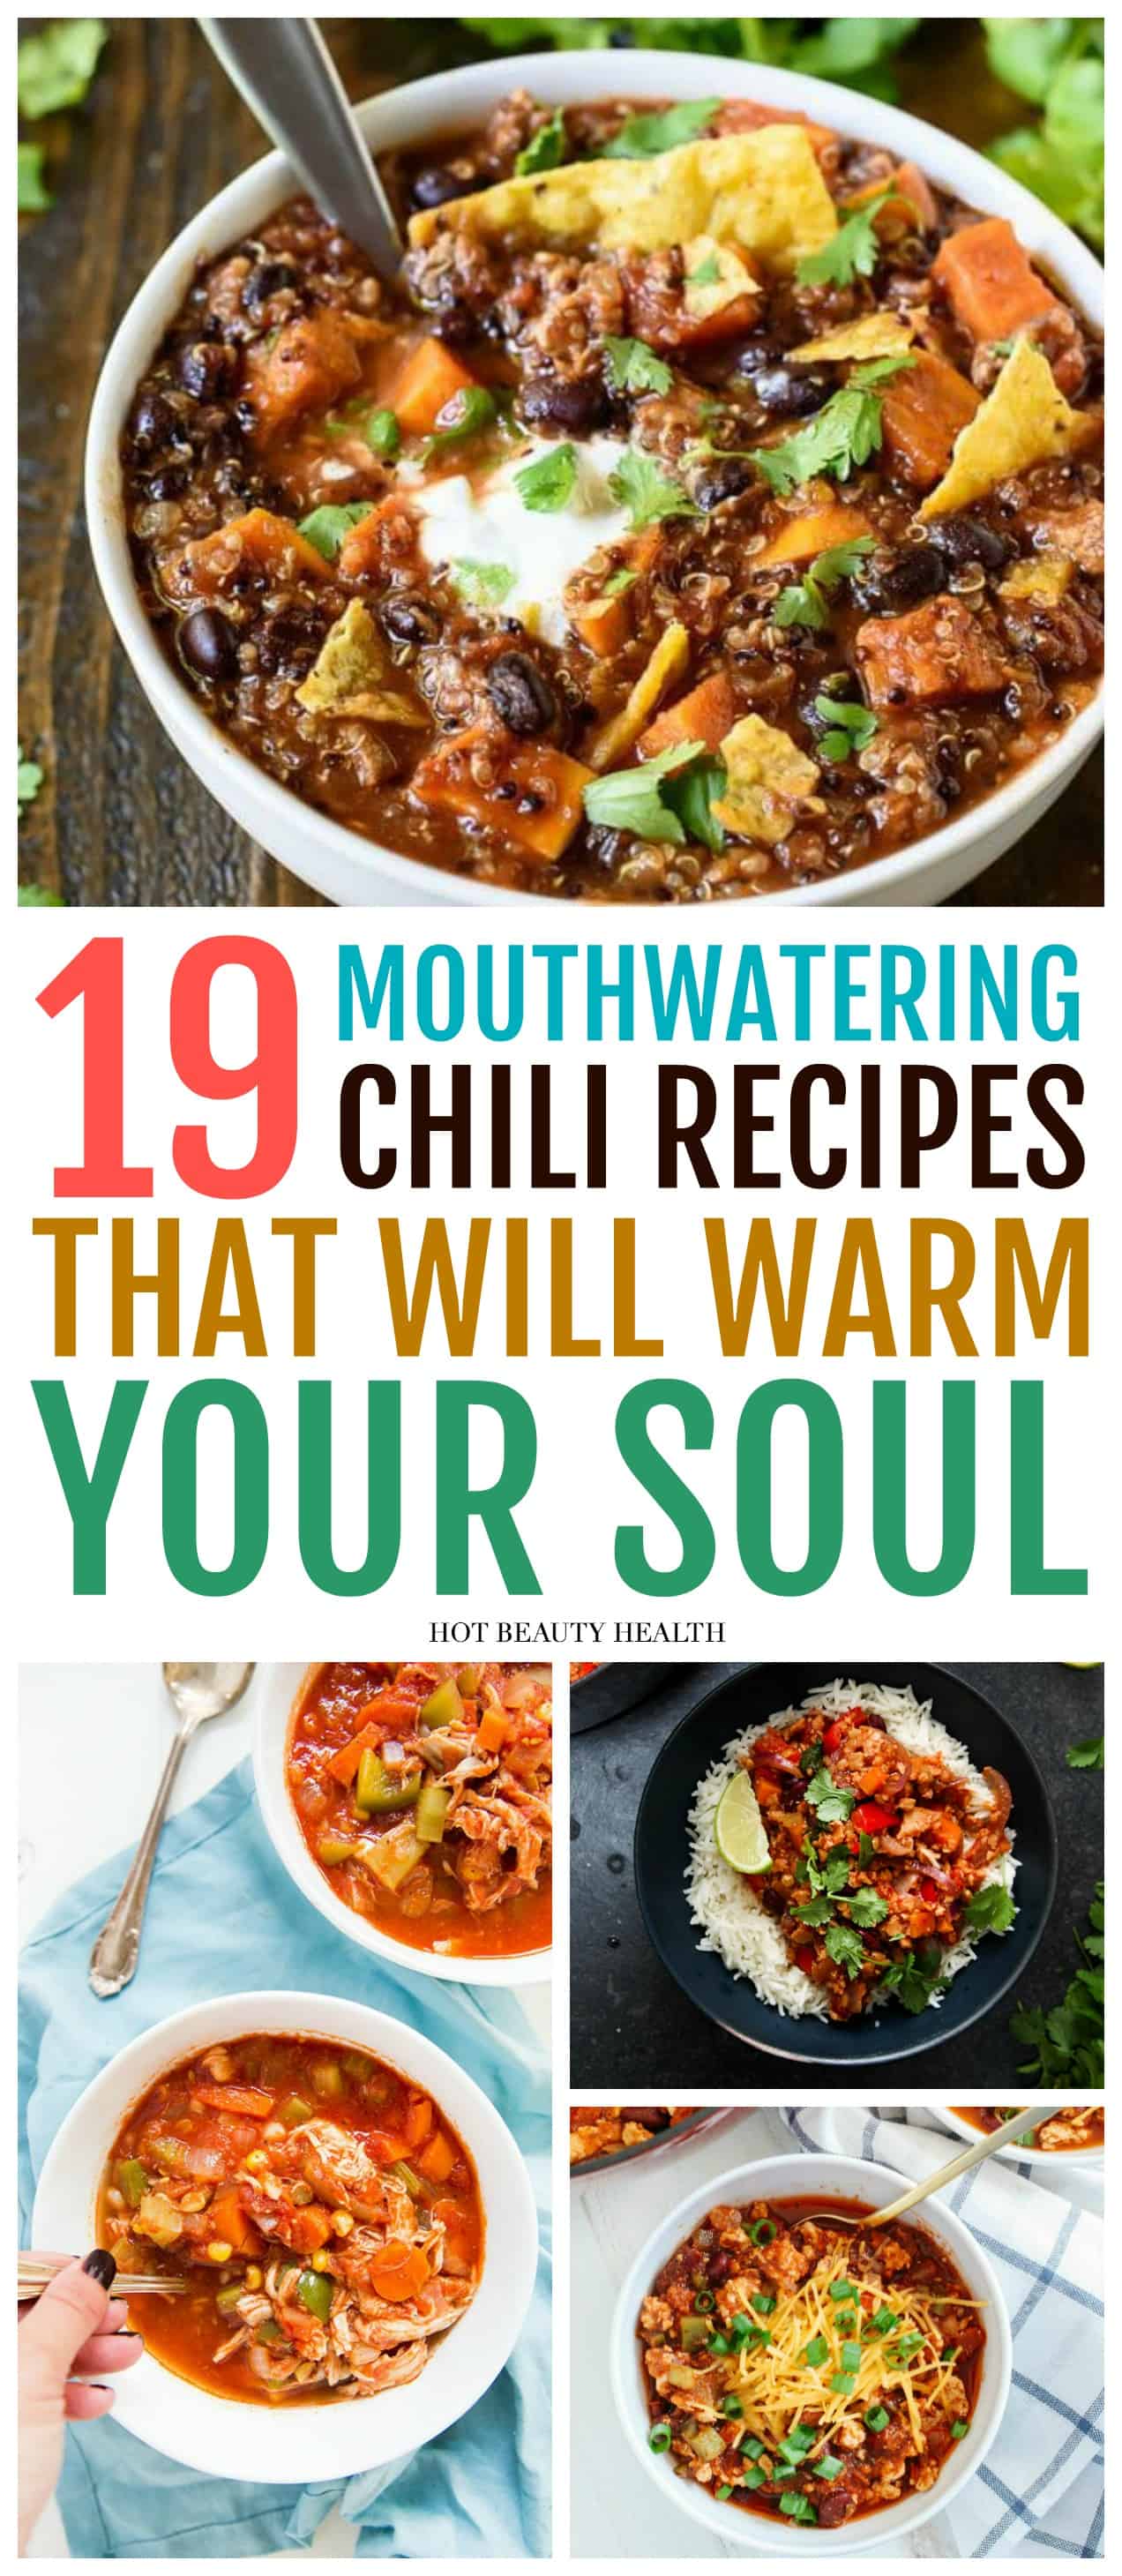 19 Savory Chili Recipes That Will Warm Your Soul Hot Beauty Health